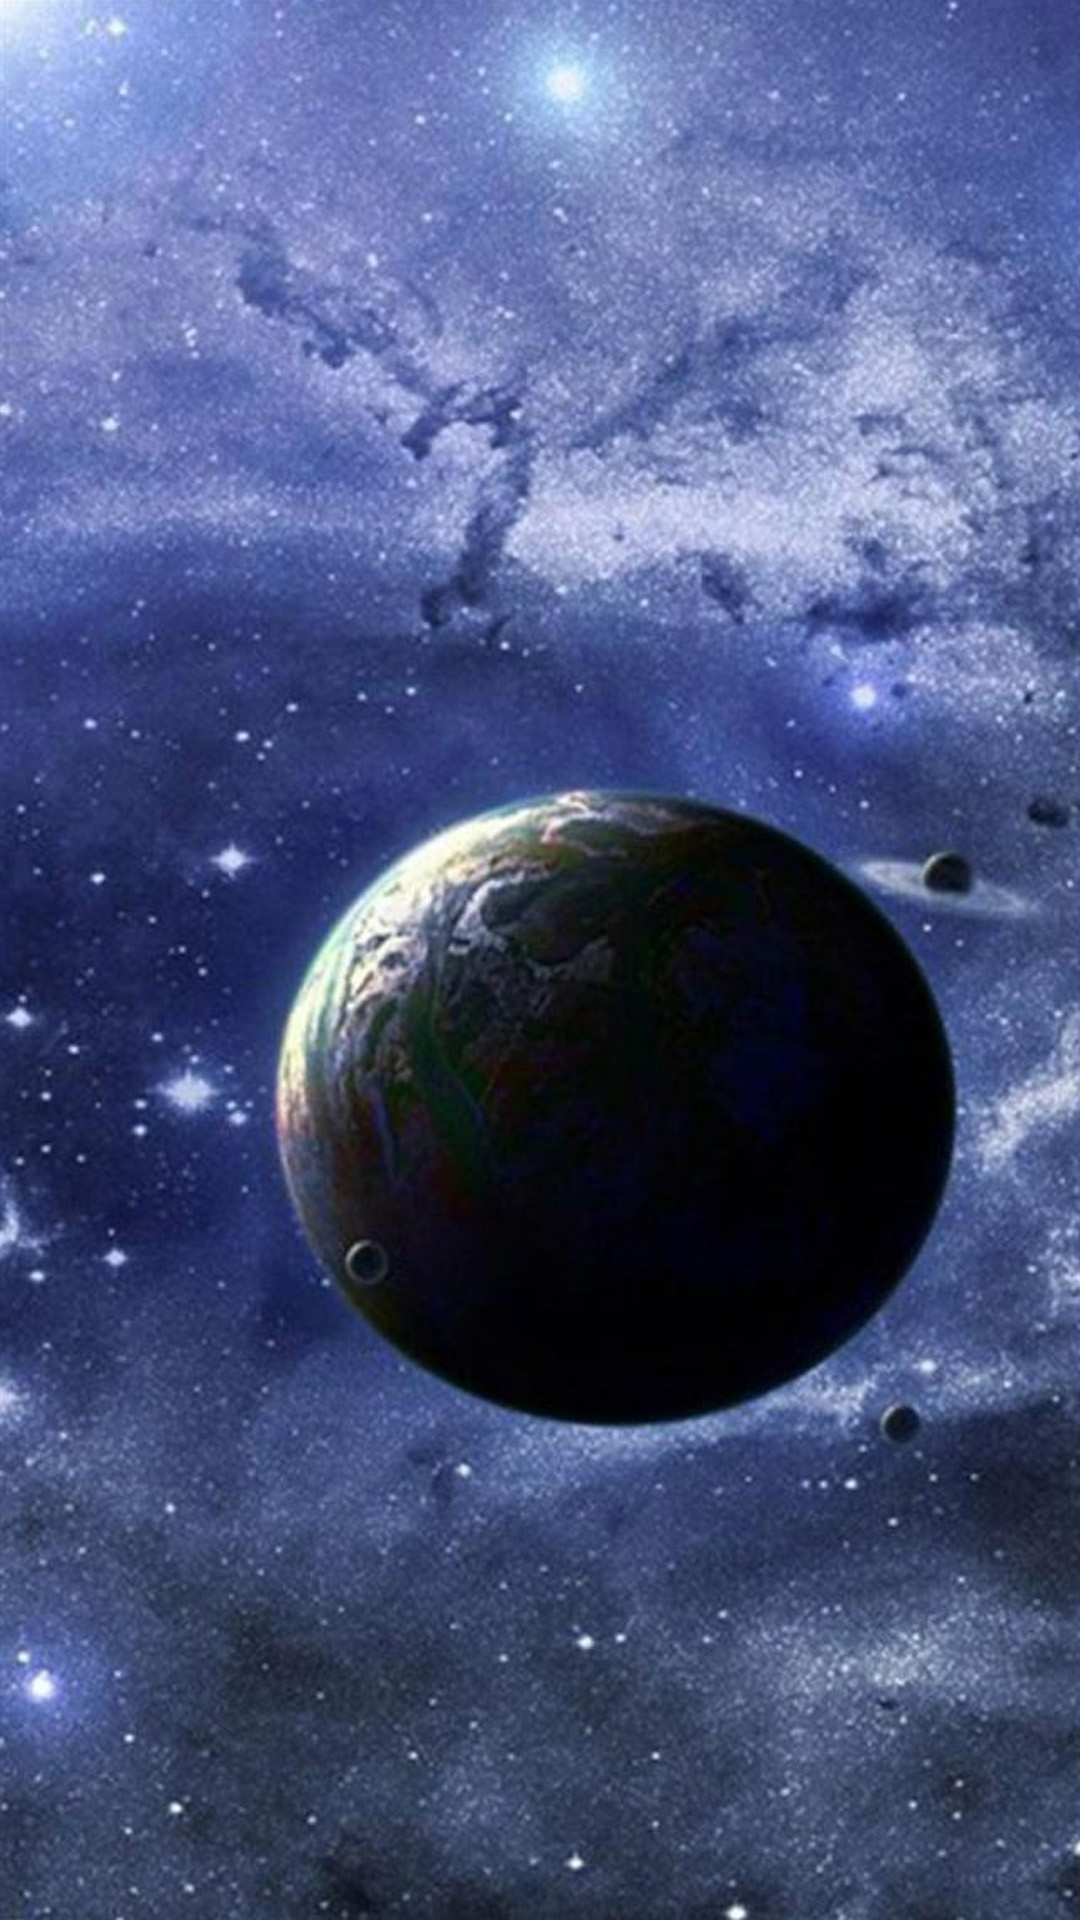 Magical Space Planet Android Wallpaper - Best Hd Wallpaper For Samsung Galaxy S6 - HD Wallpaper 